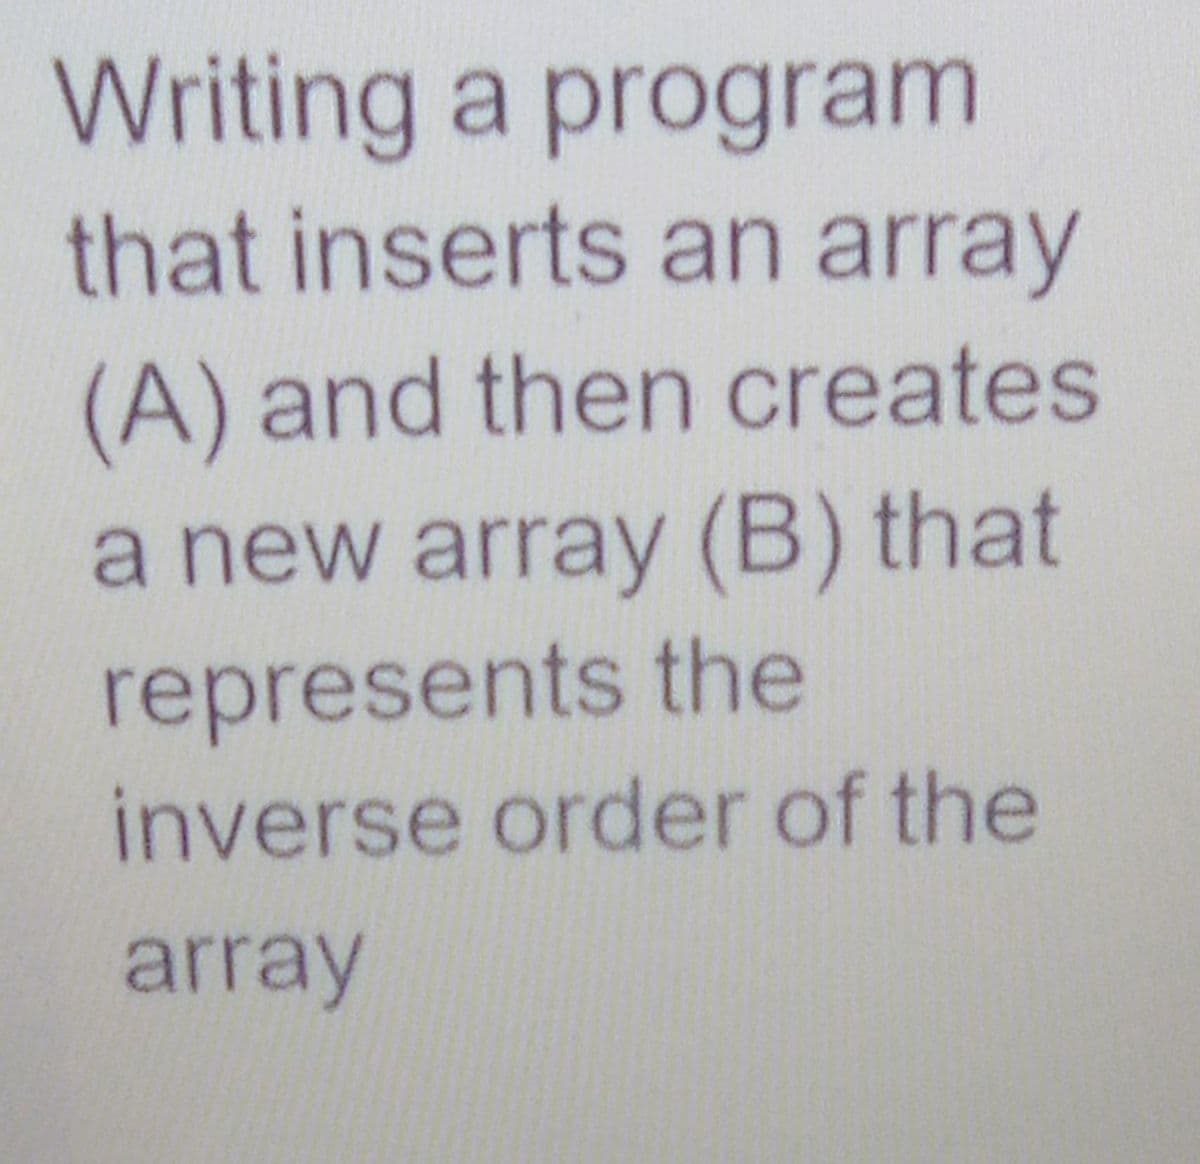 Writing a program
that inserts an array
(A) and then creates
a new array (B) that
represents the
inverse order of the
array